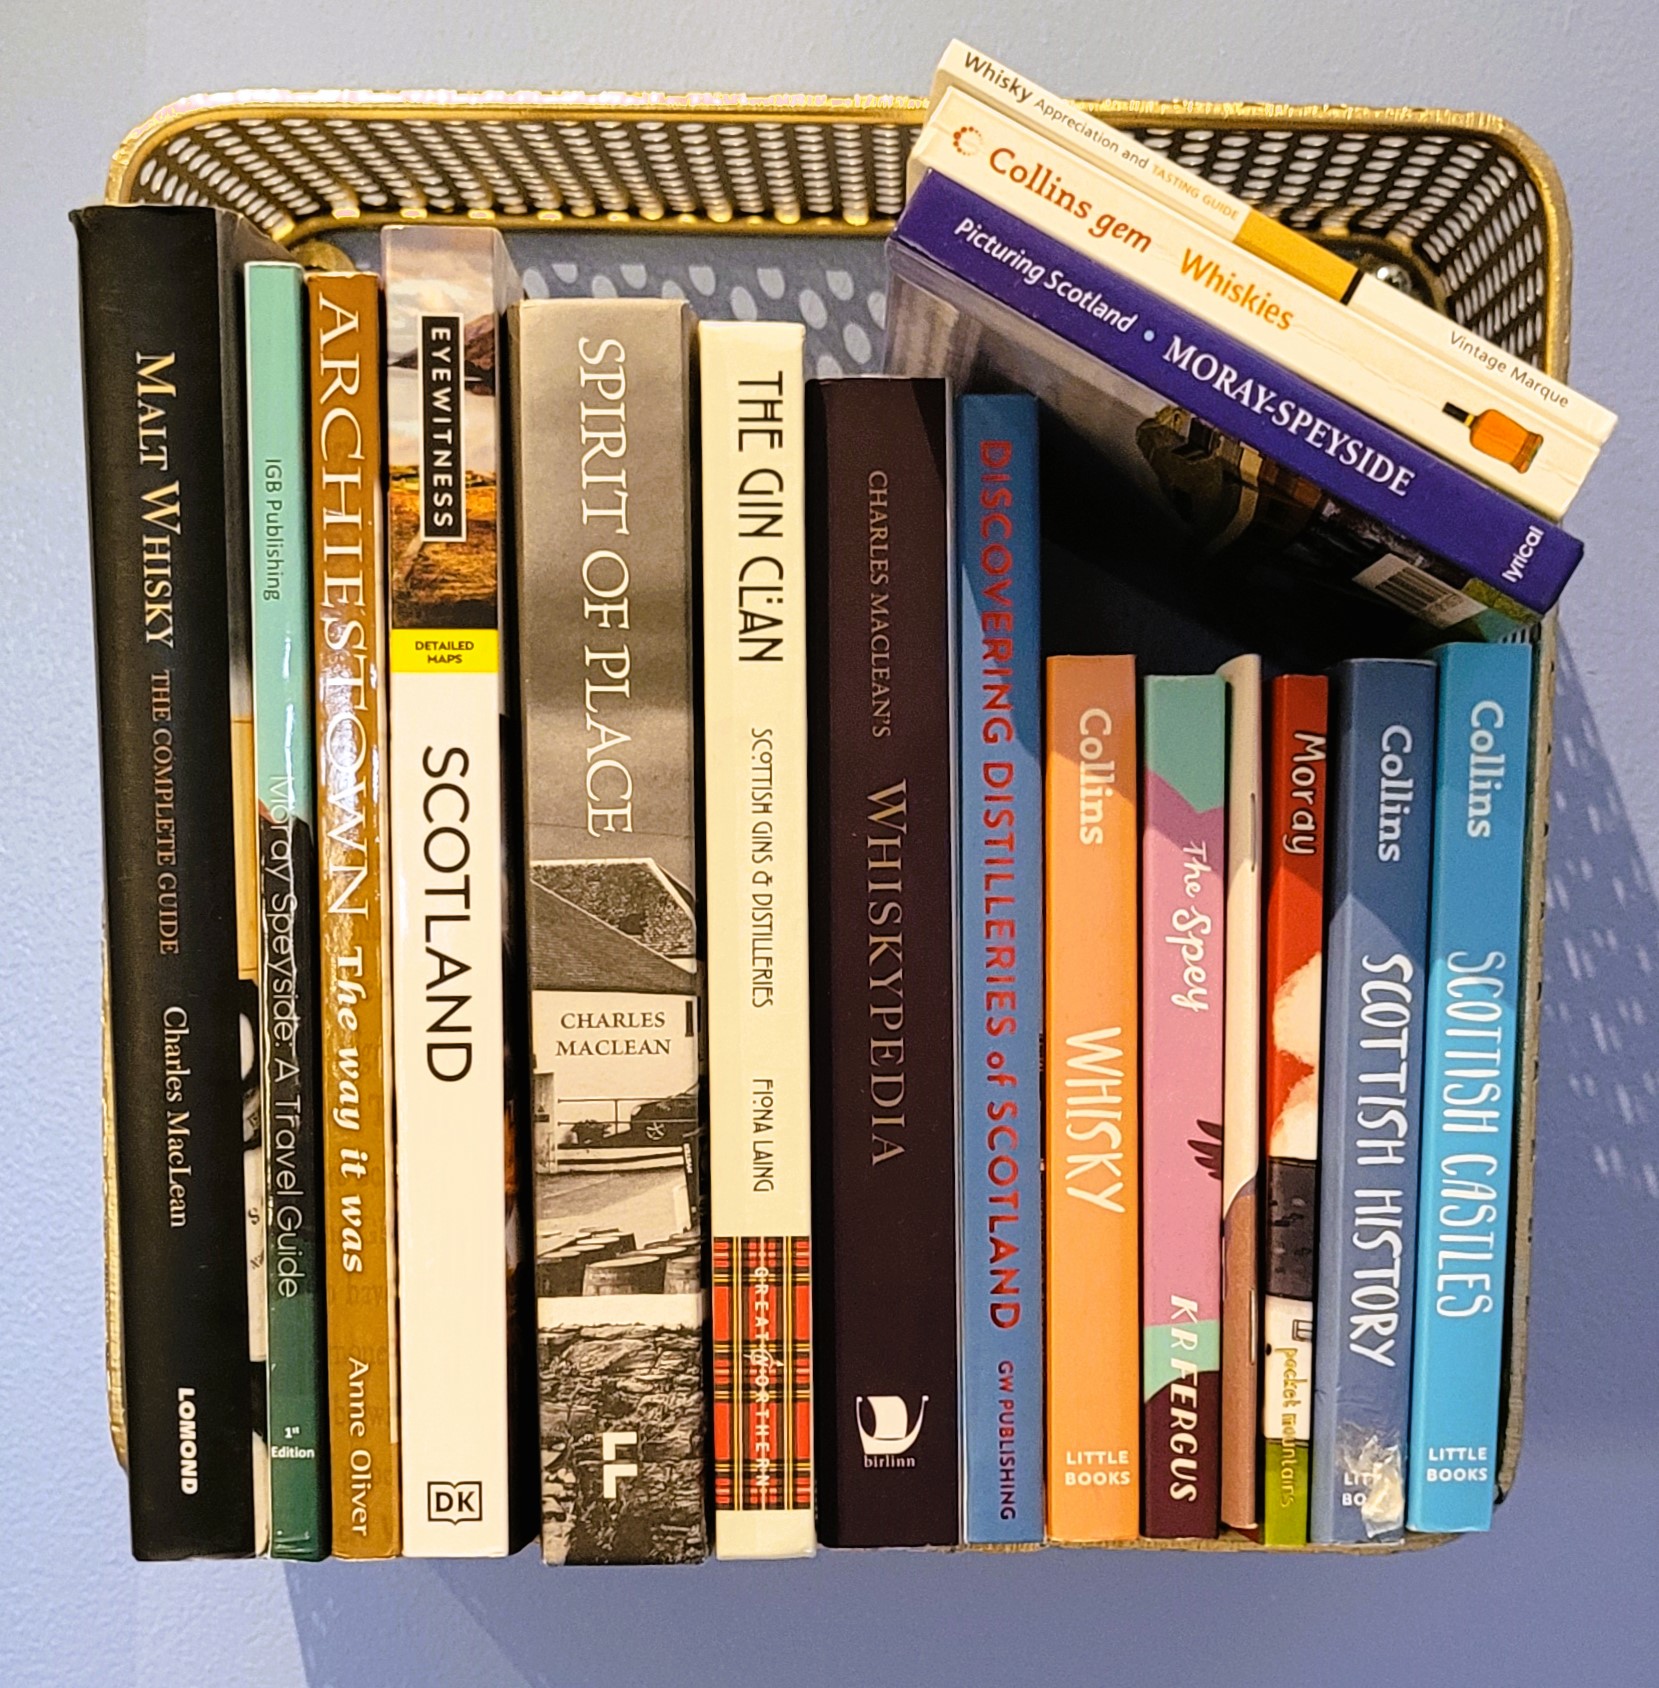 Sit back, relax, and browse the selection of local guide books